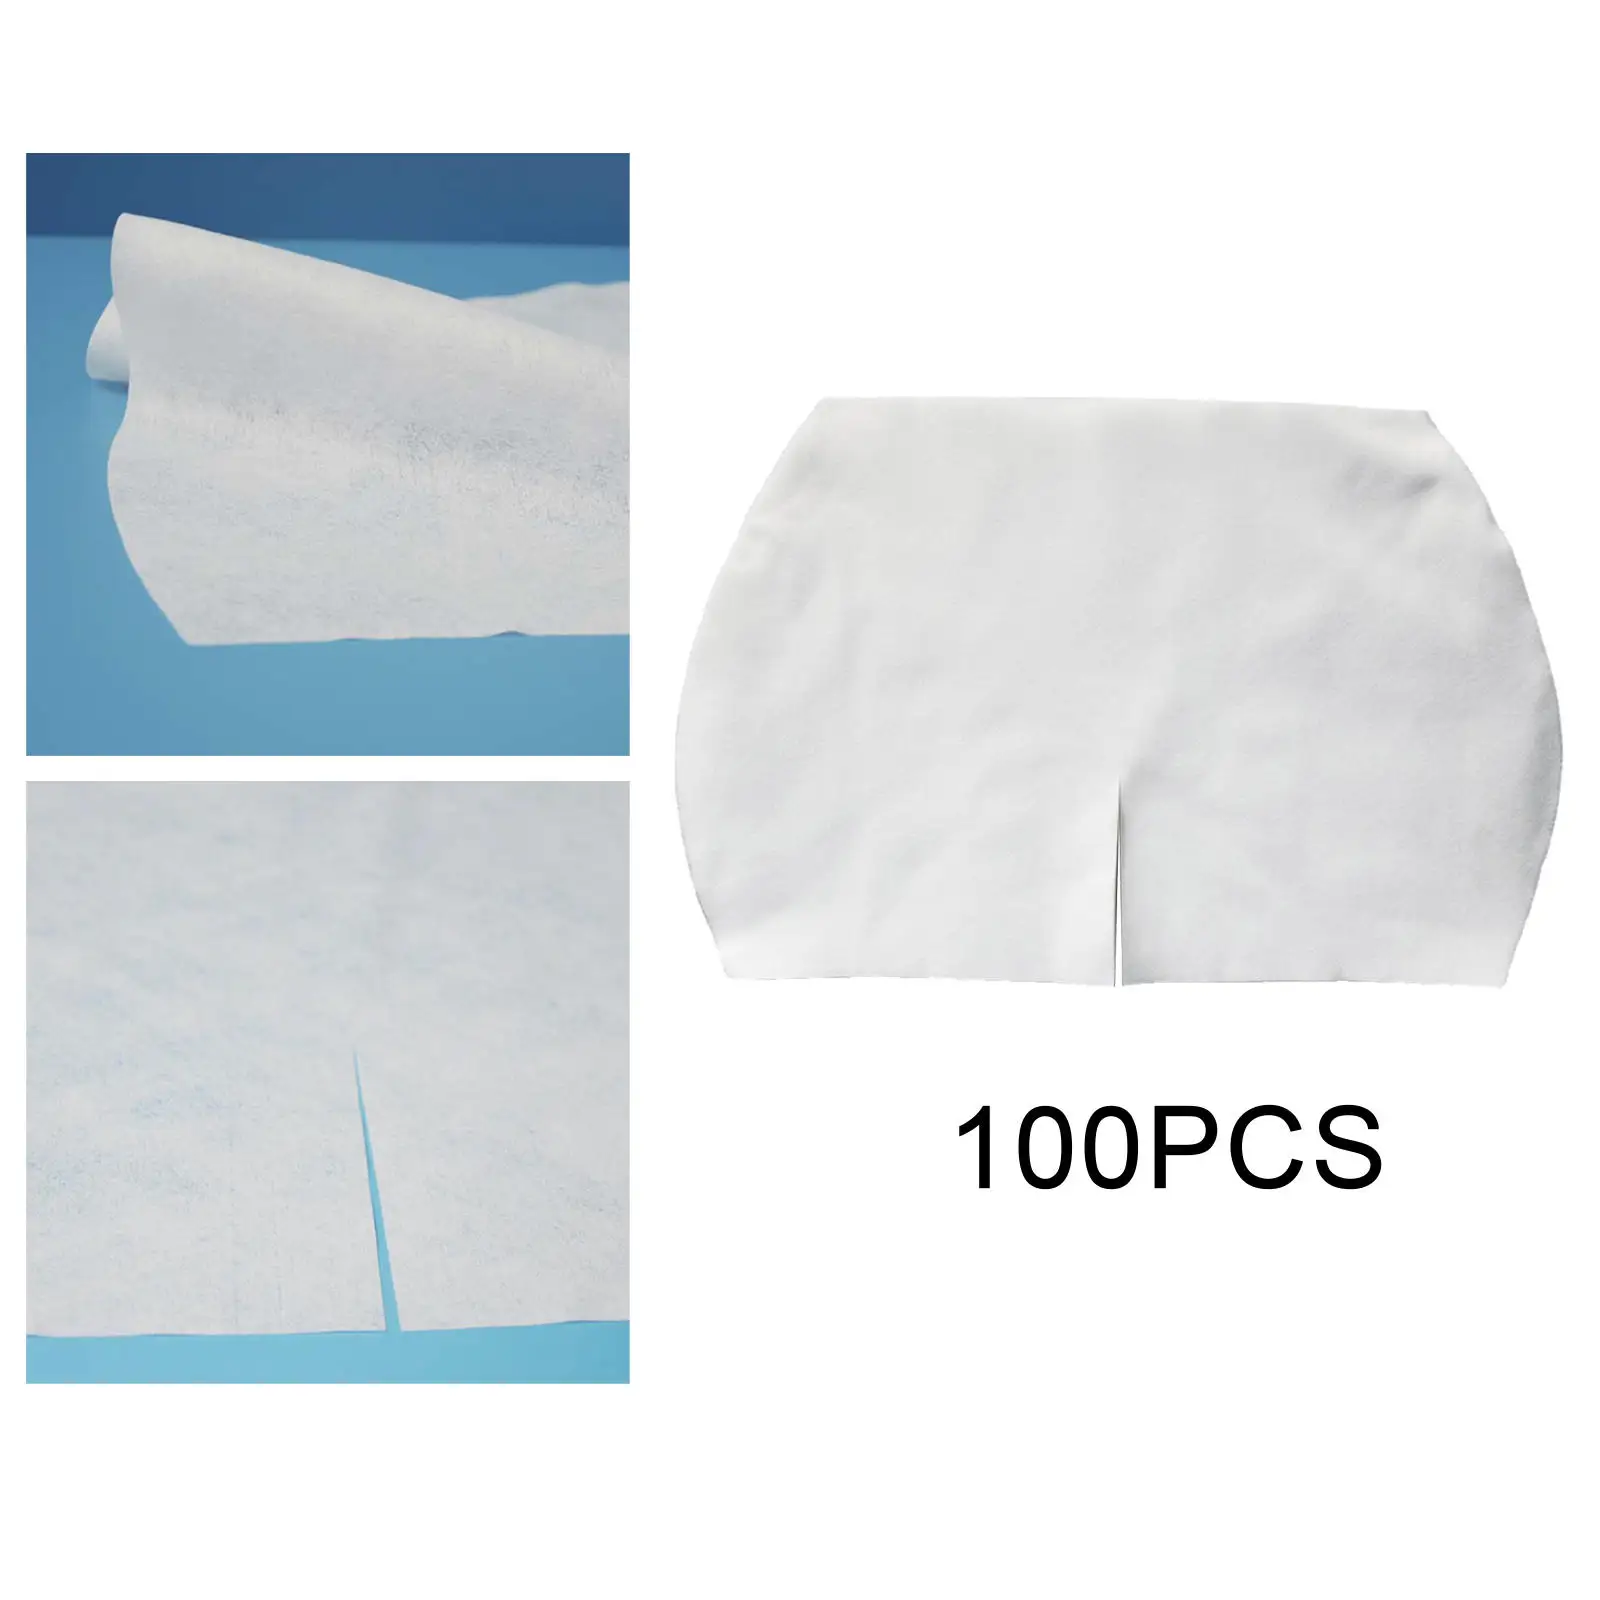 100Pcs Makeup Disposable Non Woven Cotton Hips Paper Pads DIY Hip Protector Easy to Use White Soft Skin Care Hip Guard for Home